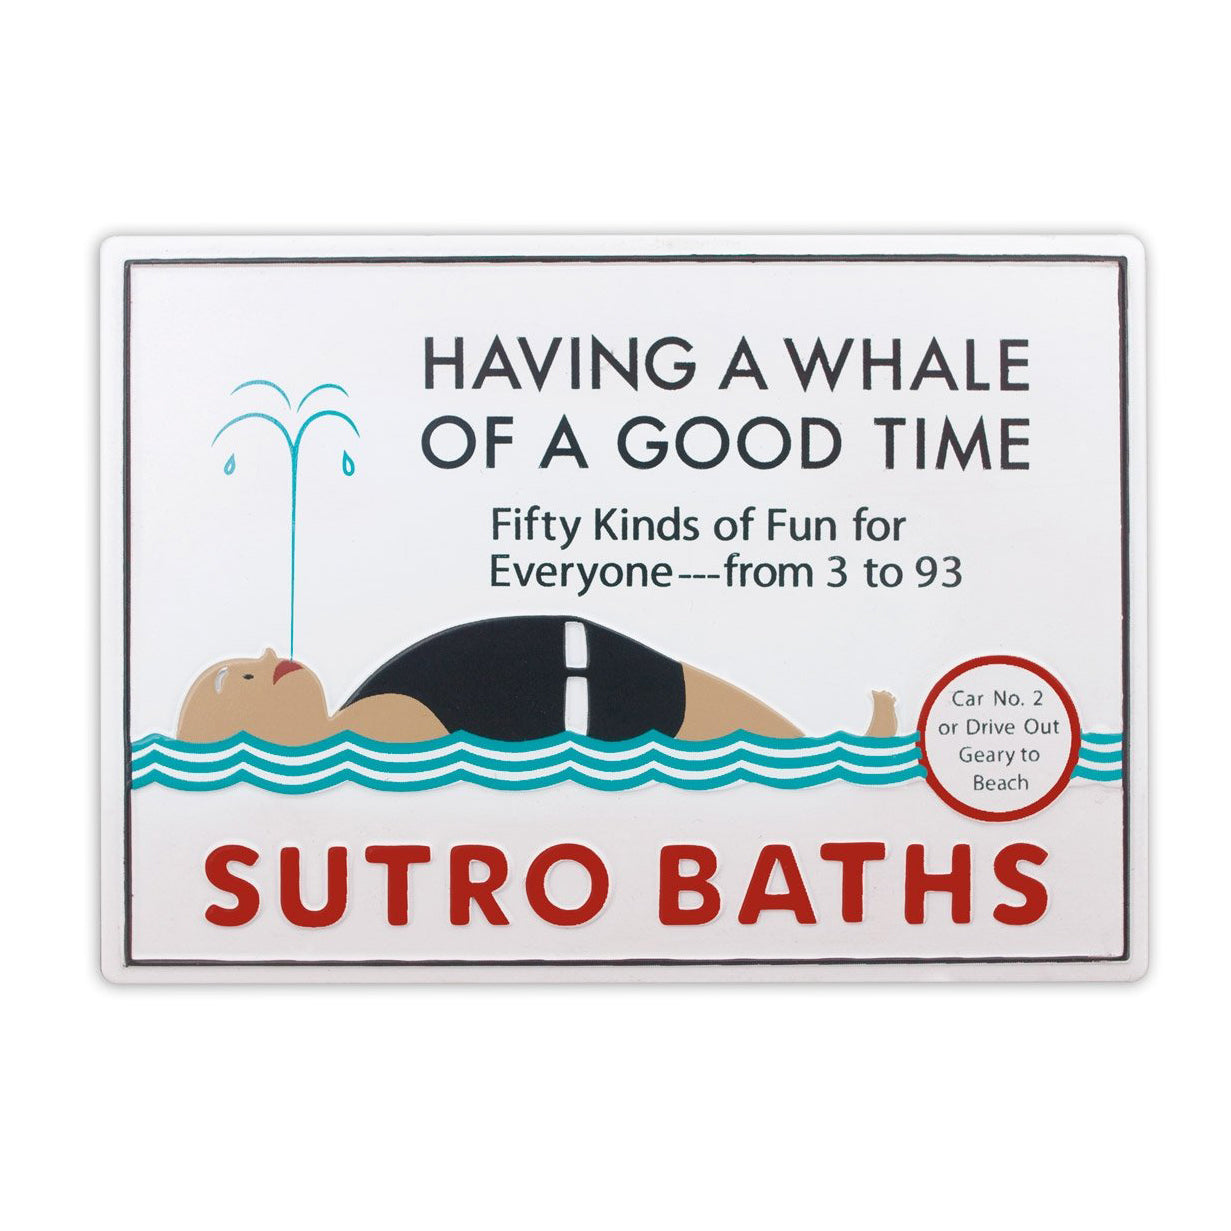 Multicolor souvenir magnet of San Francisco's Sutro Baths, featuring vintage advertisement for baths from early 20th century.